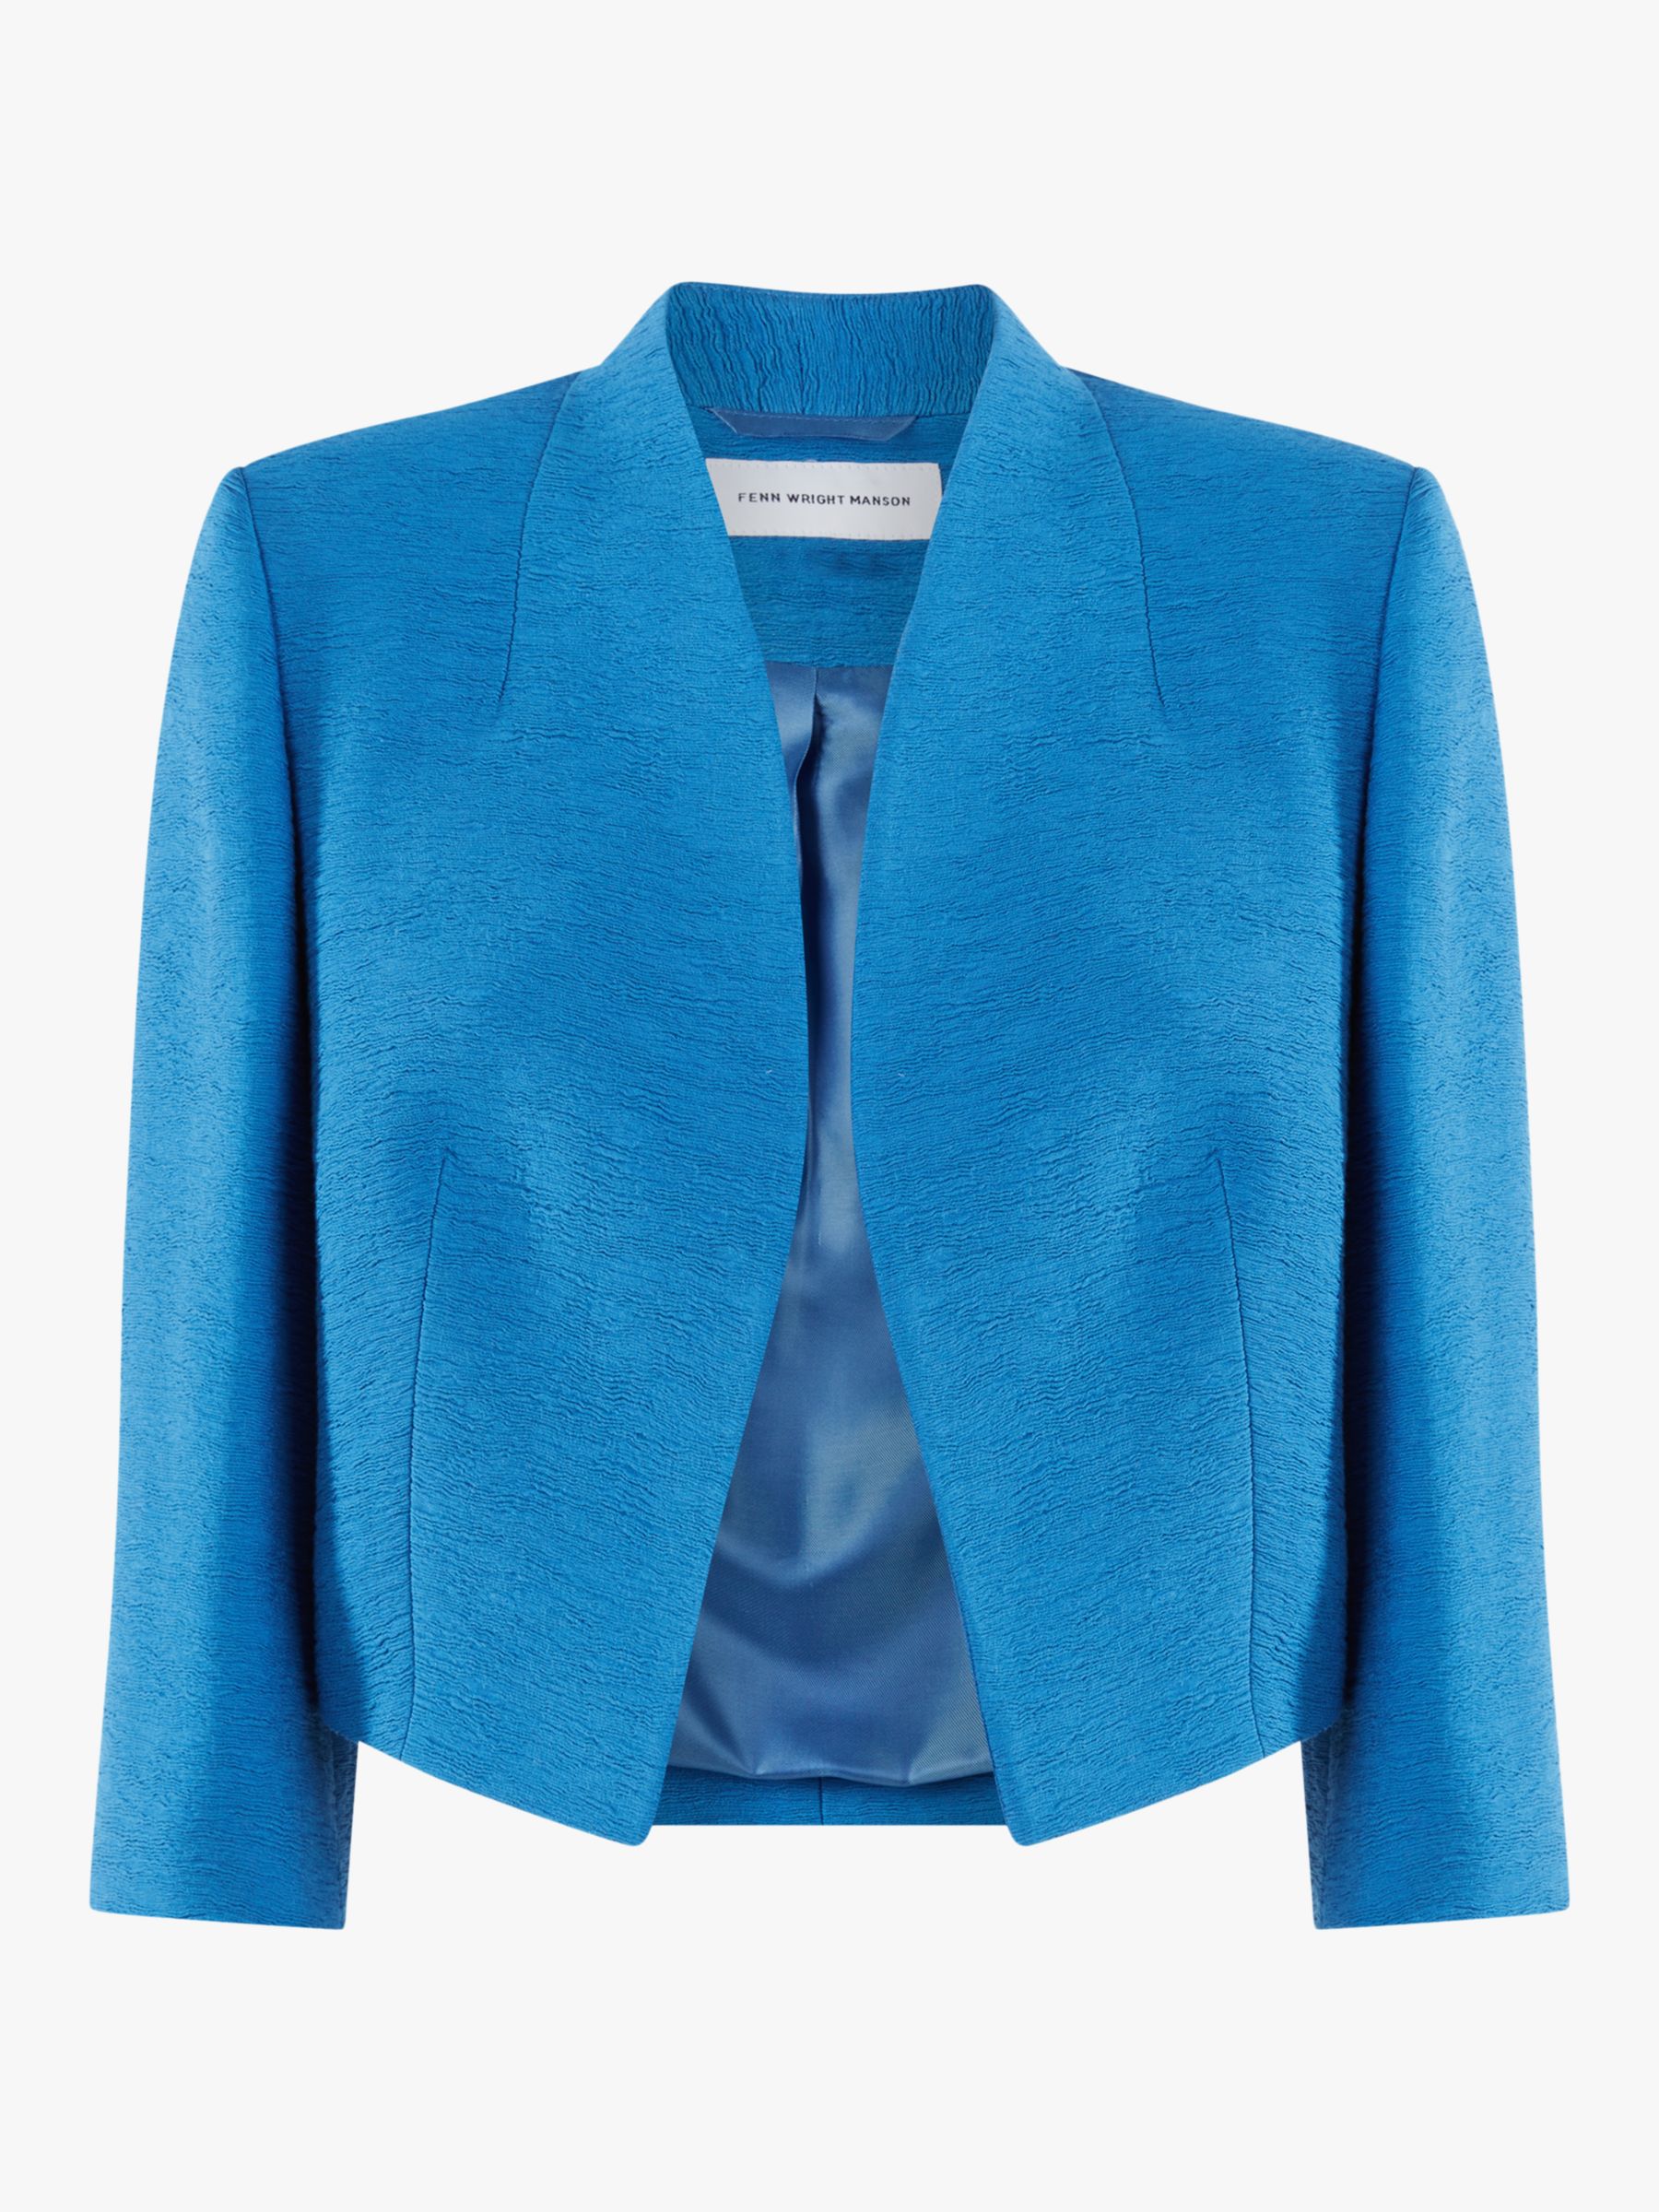 Fenn Wright Manson Caterine Cropped Tailored Jacket, Turquoise at John ...